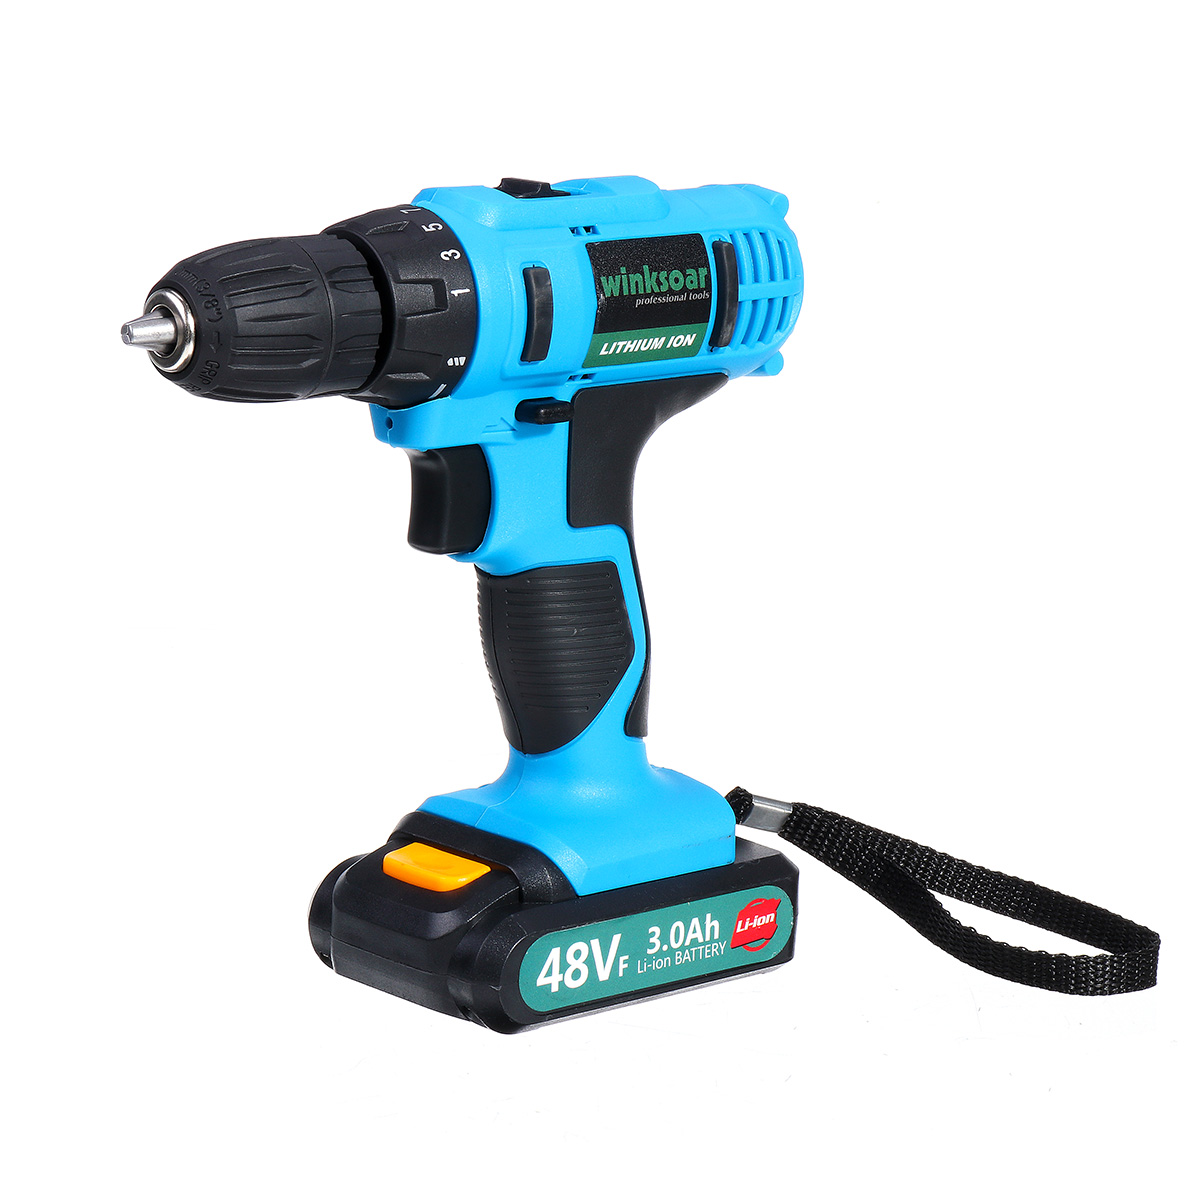 

48VF 3000mAh Electric Drill Cordless Rechargeable Power Screwdriver 25+1 Torque W/ 1 or 2 Li-ion Battery